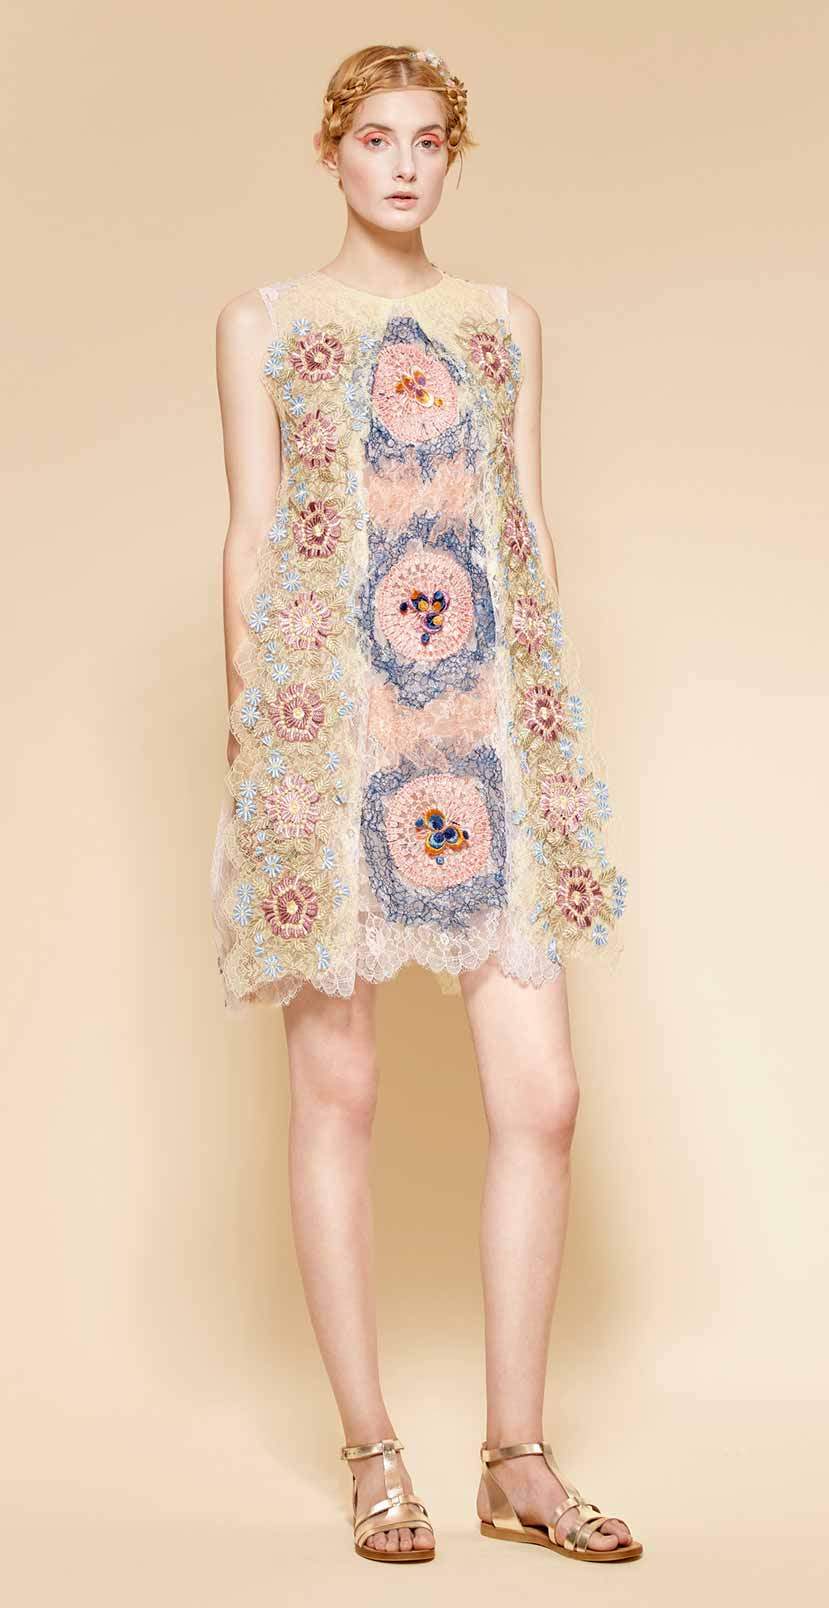 Short sleveesless lace dress in different soft colors and shades